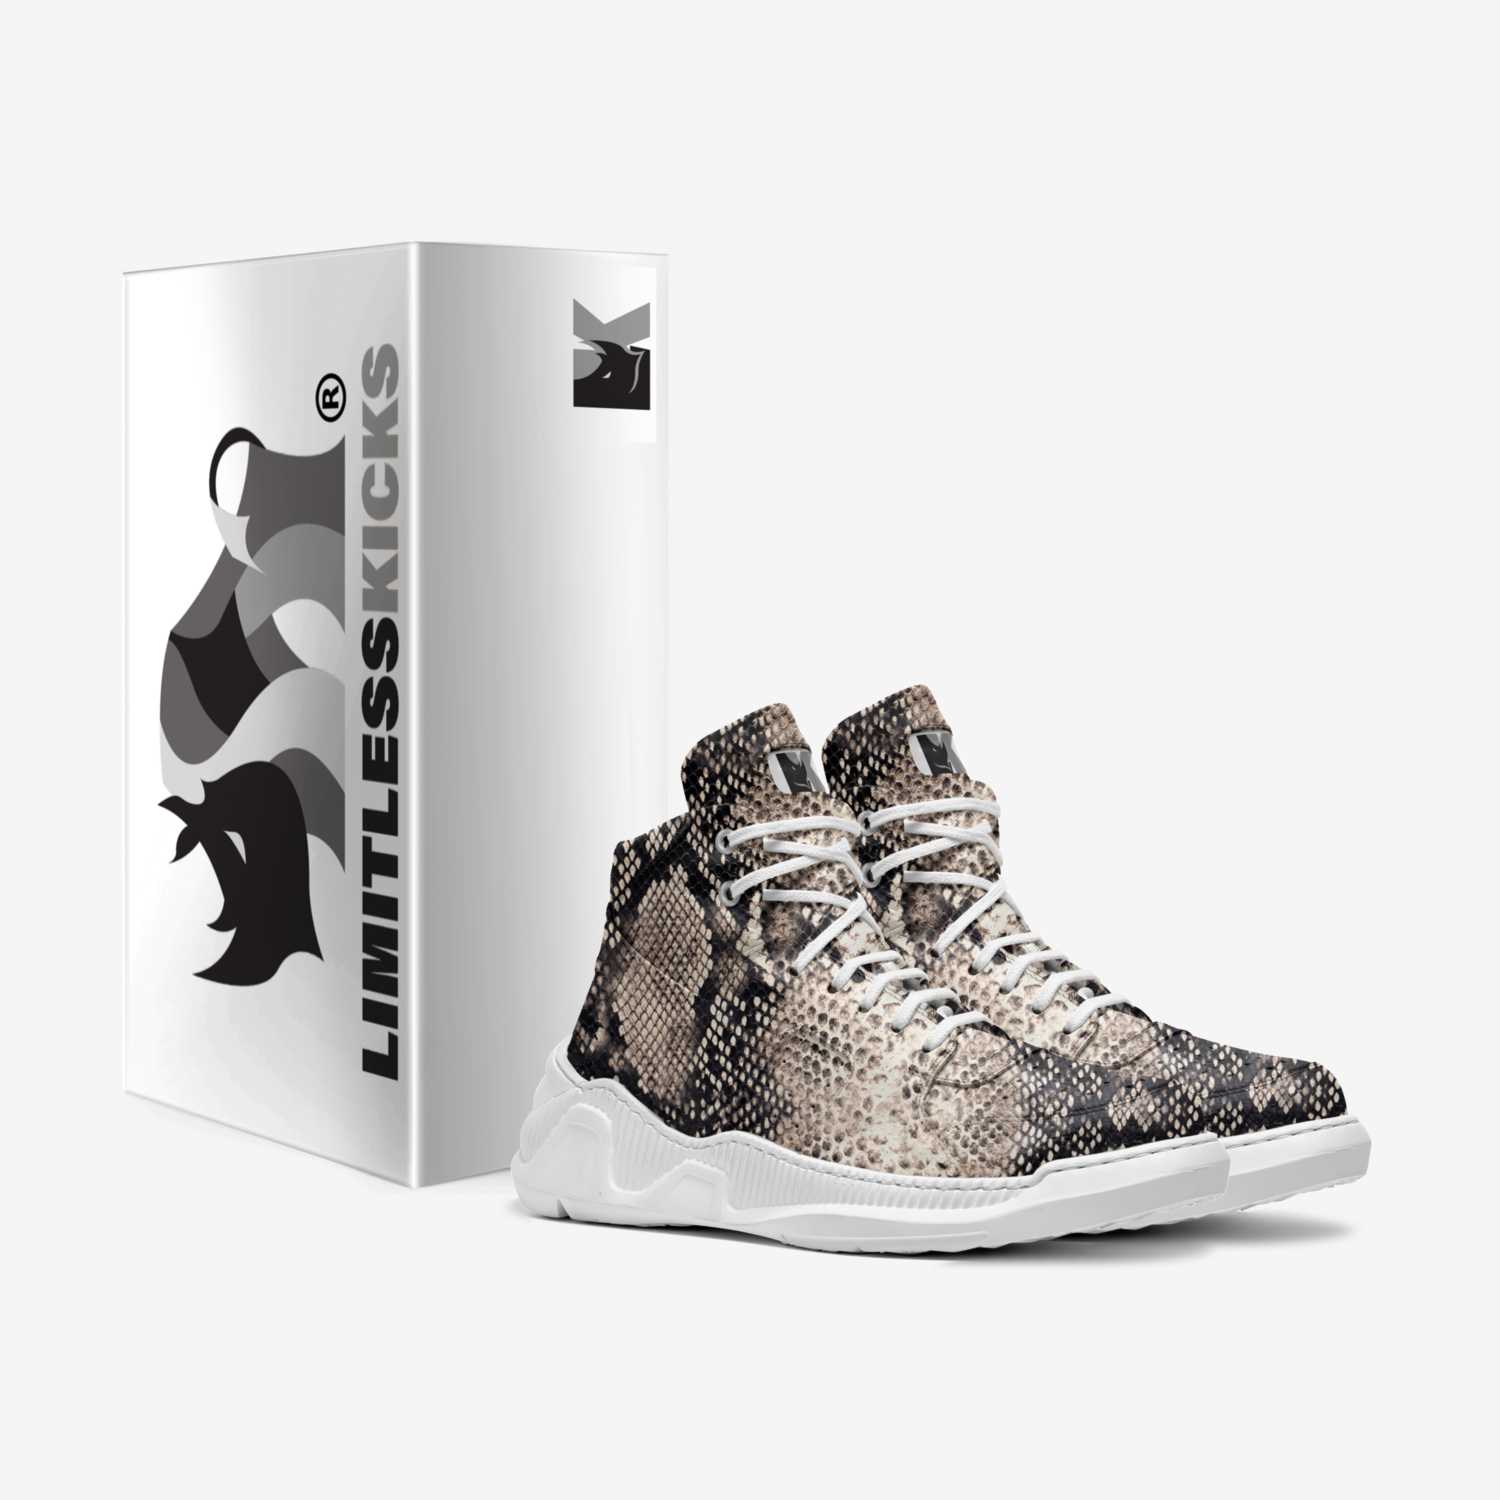 Snake Skin custom made in Italy shoes by Limitless Kicks | Box view